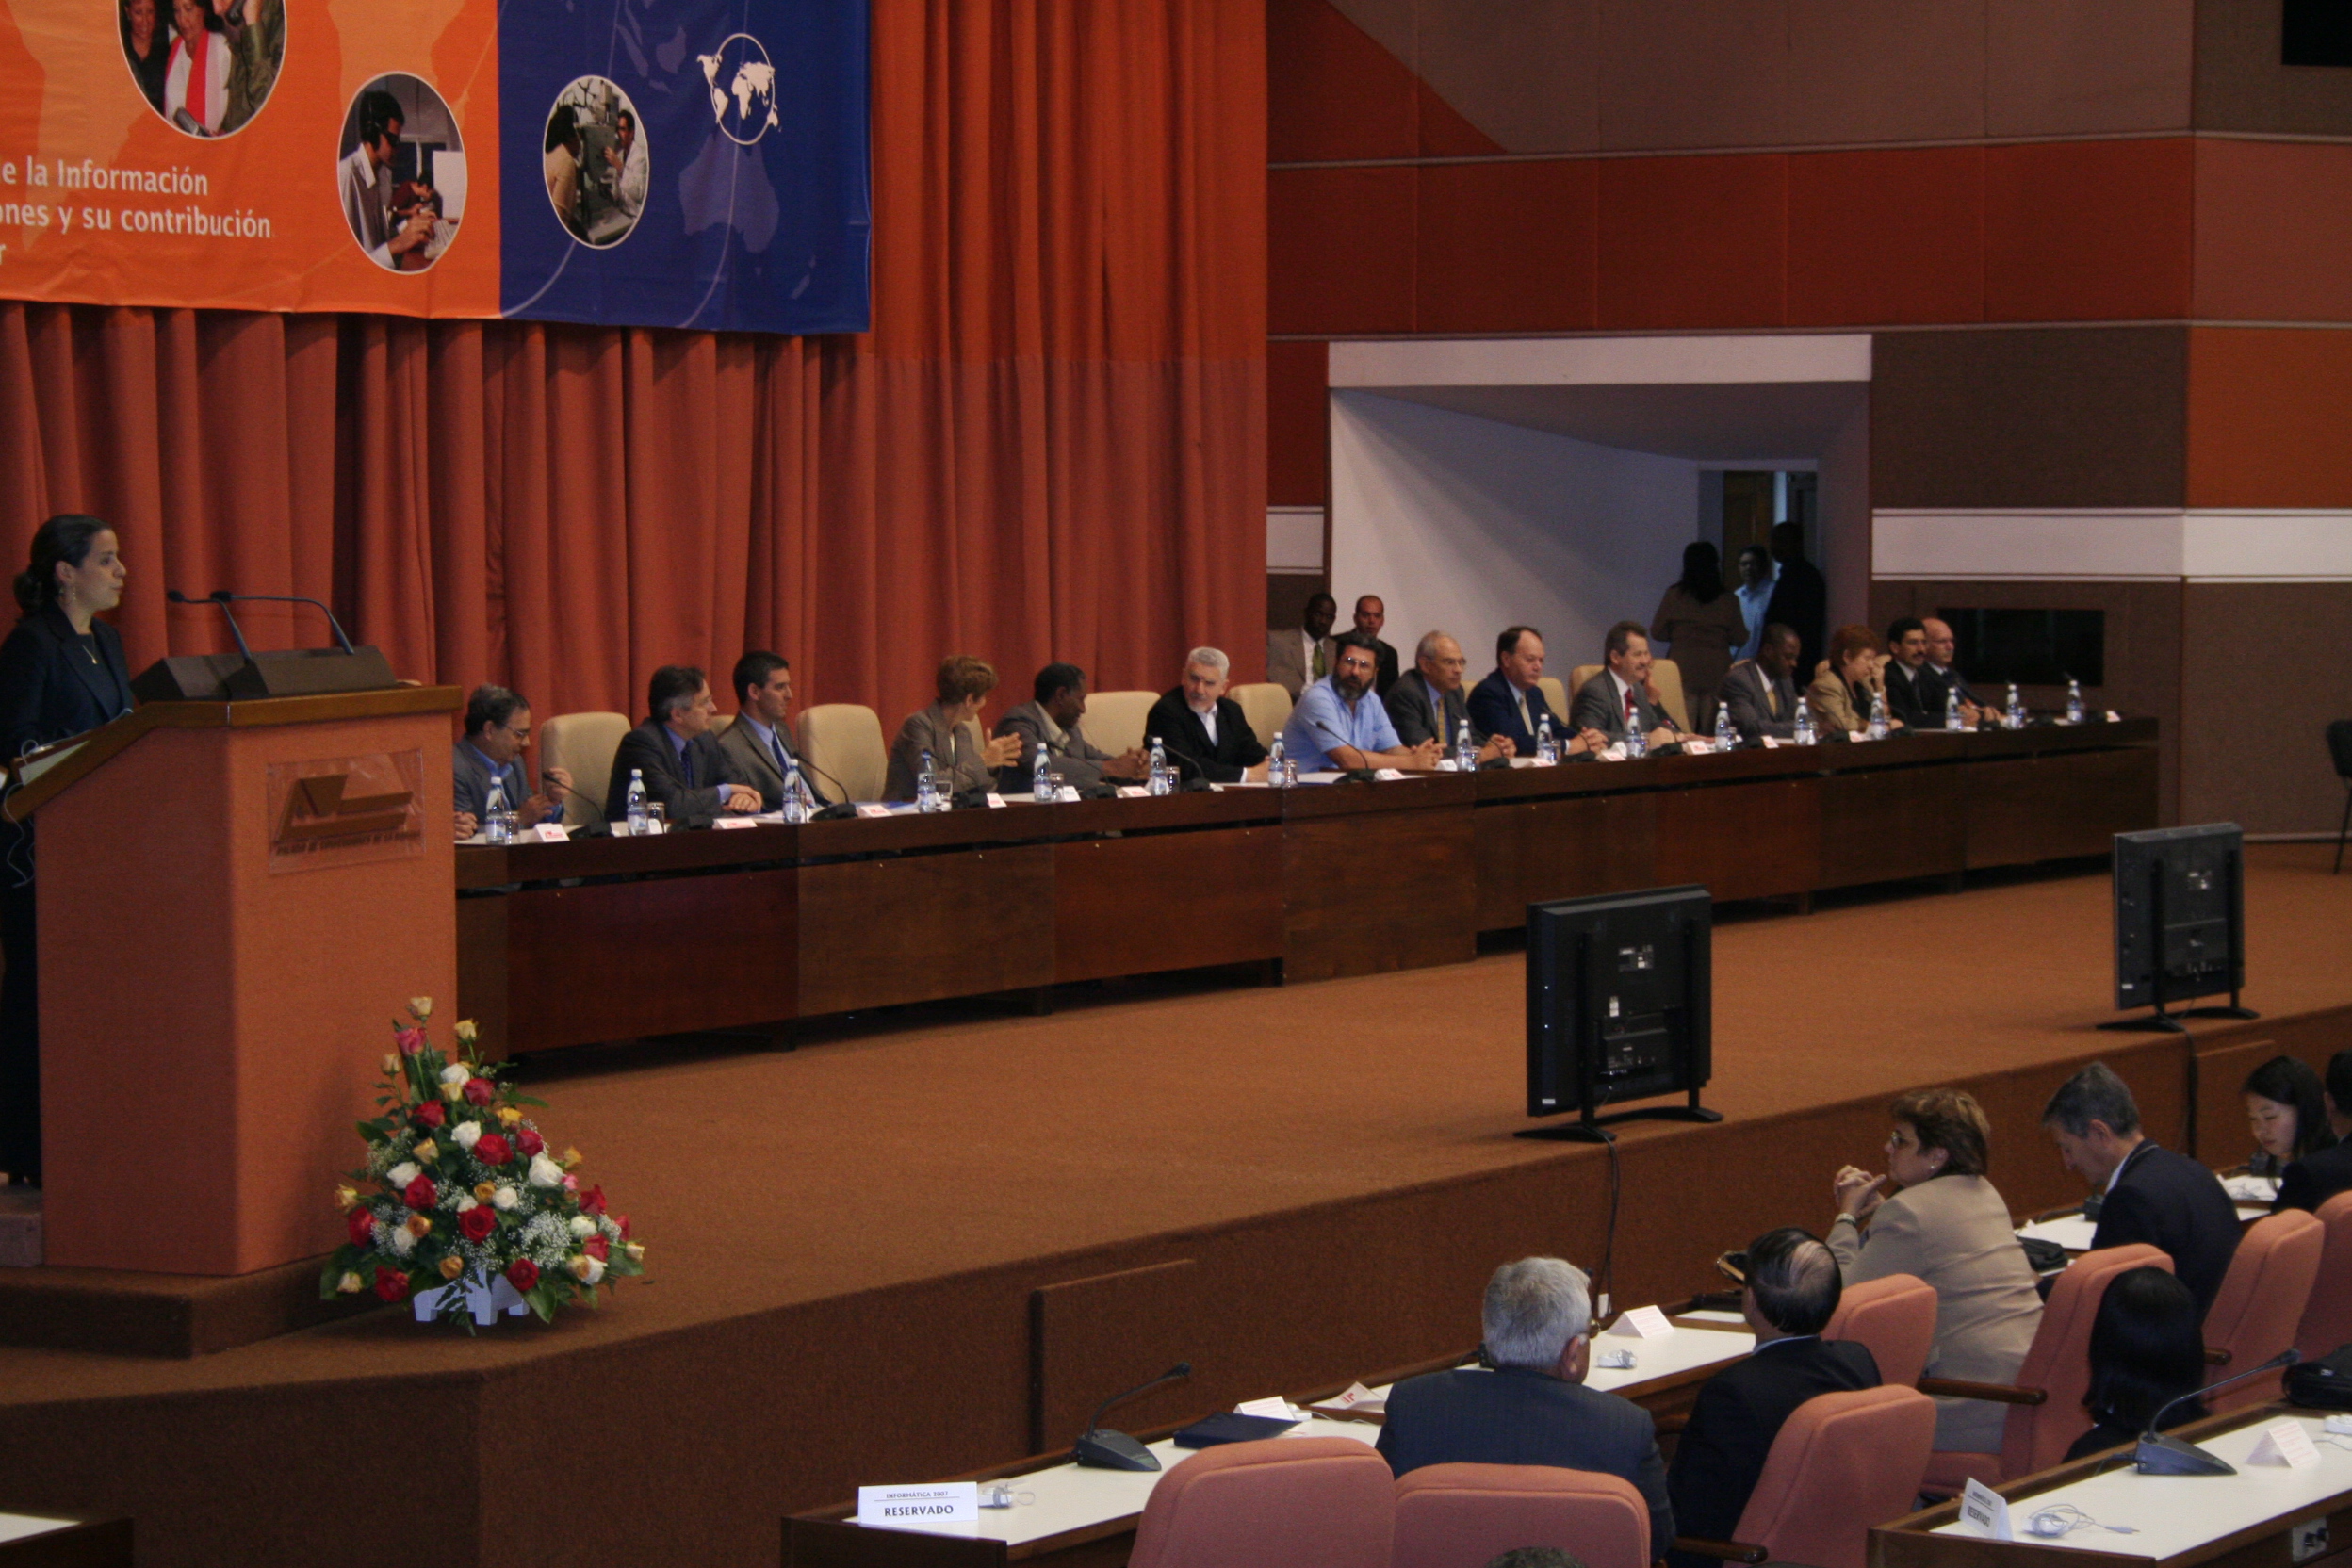 2007 Presidency of the Convention s opening ceremony